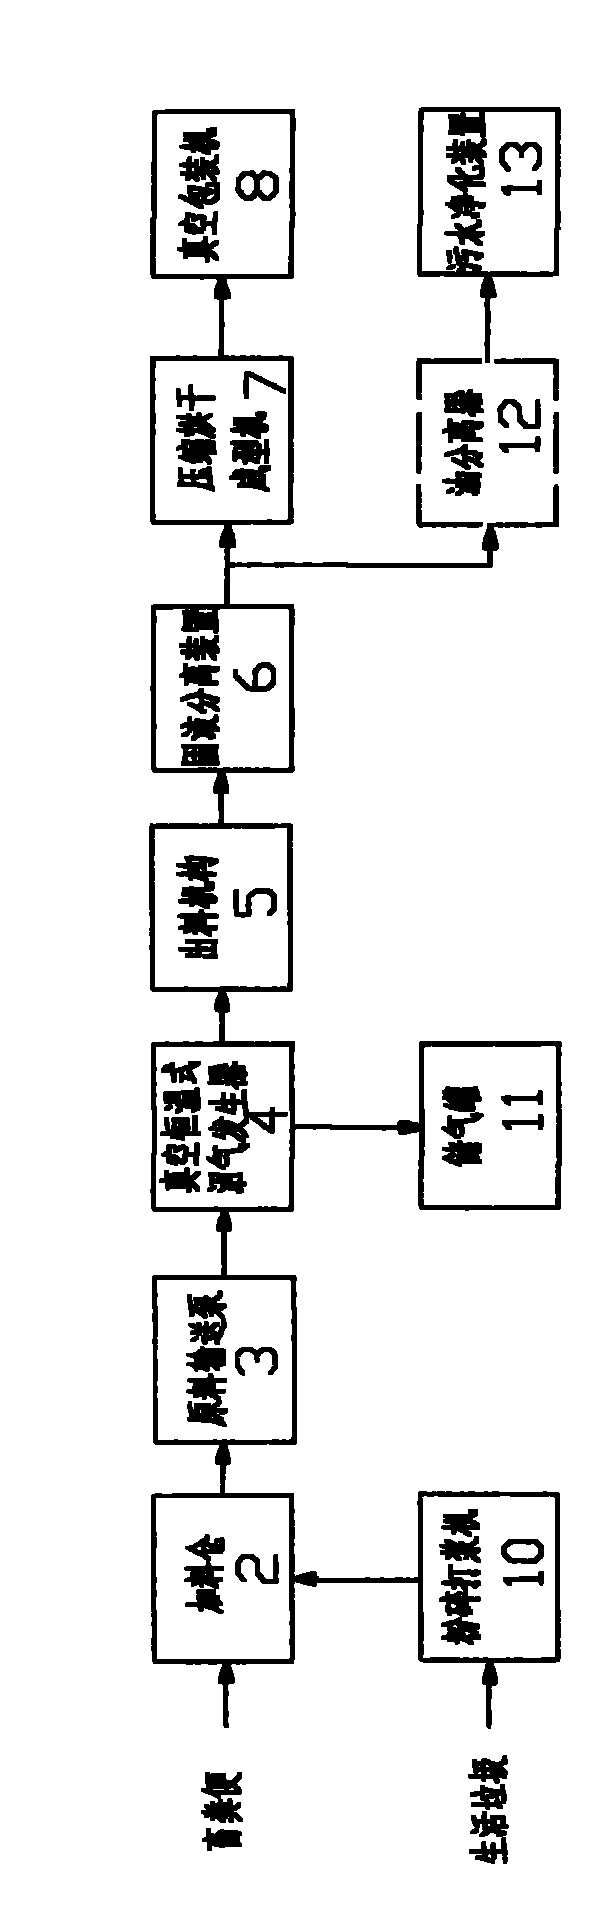 Multifunctional device for treating and converting pollutants into energy resource